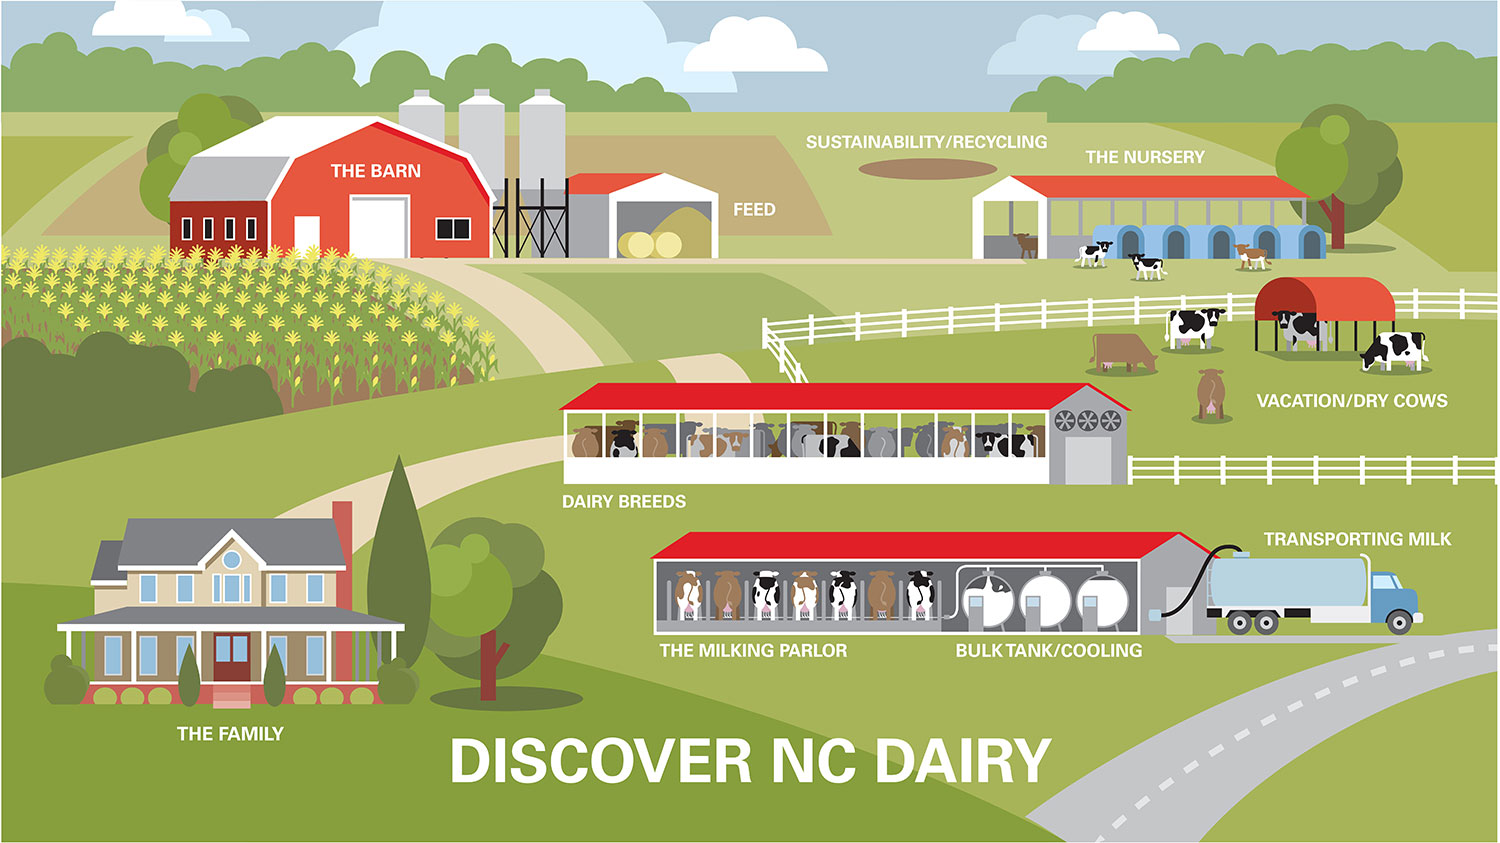 "Discover NC Dairy" interactive map image